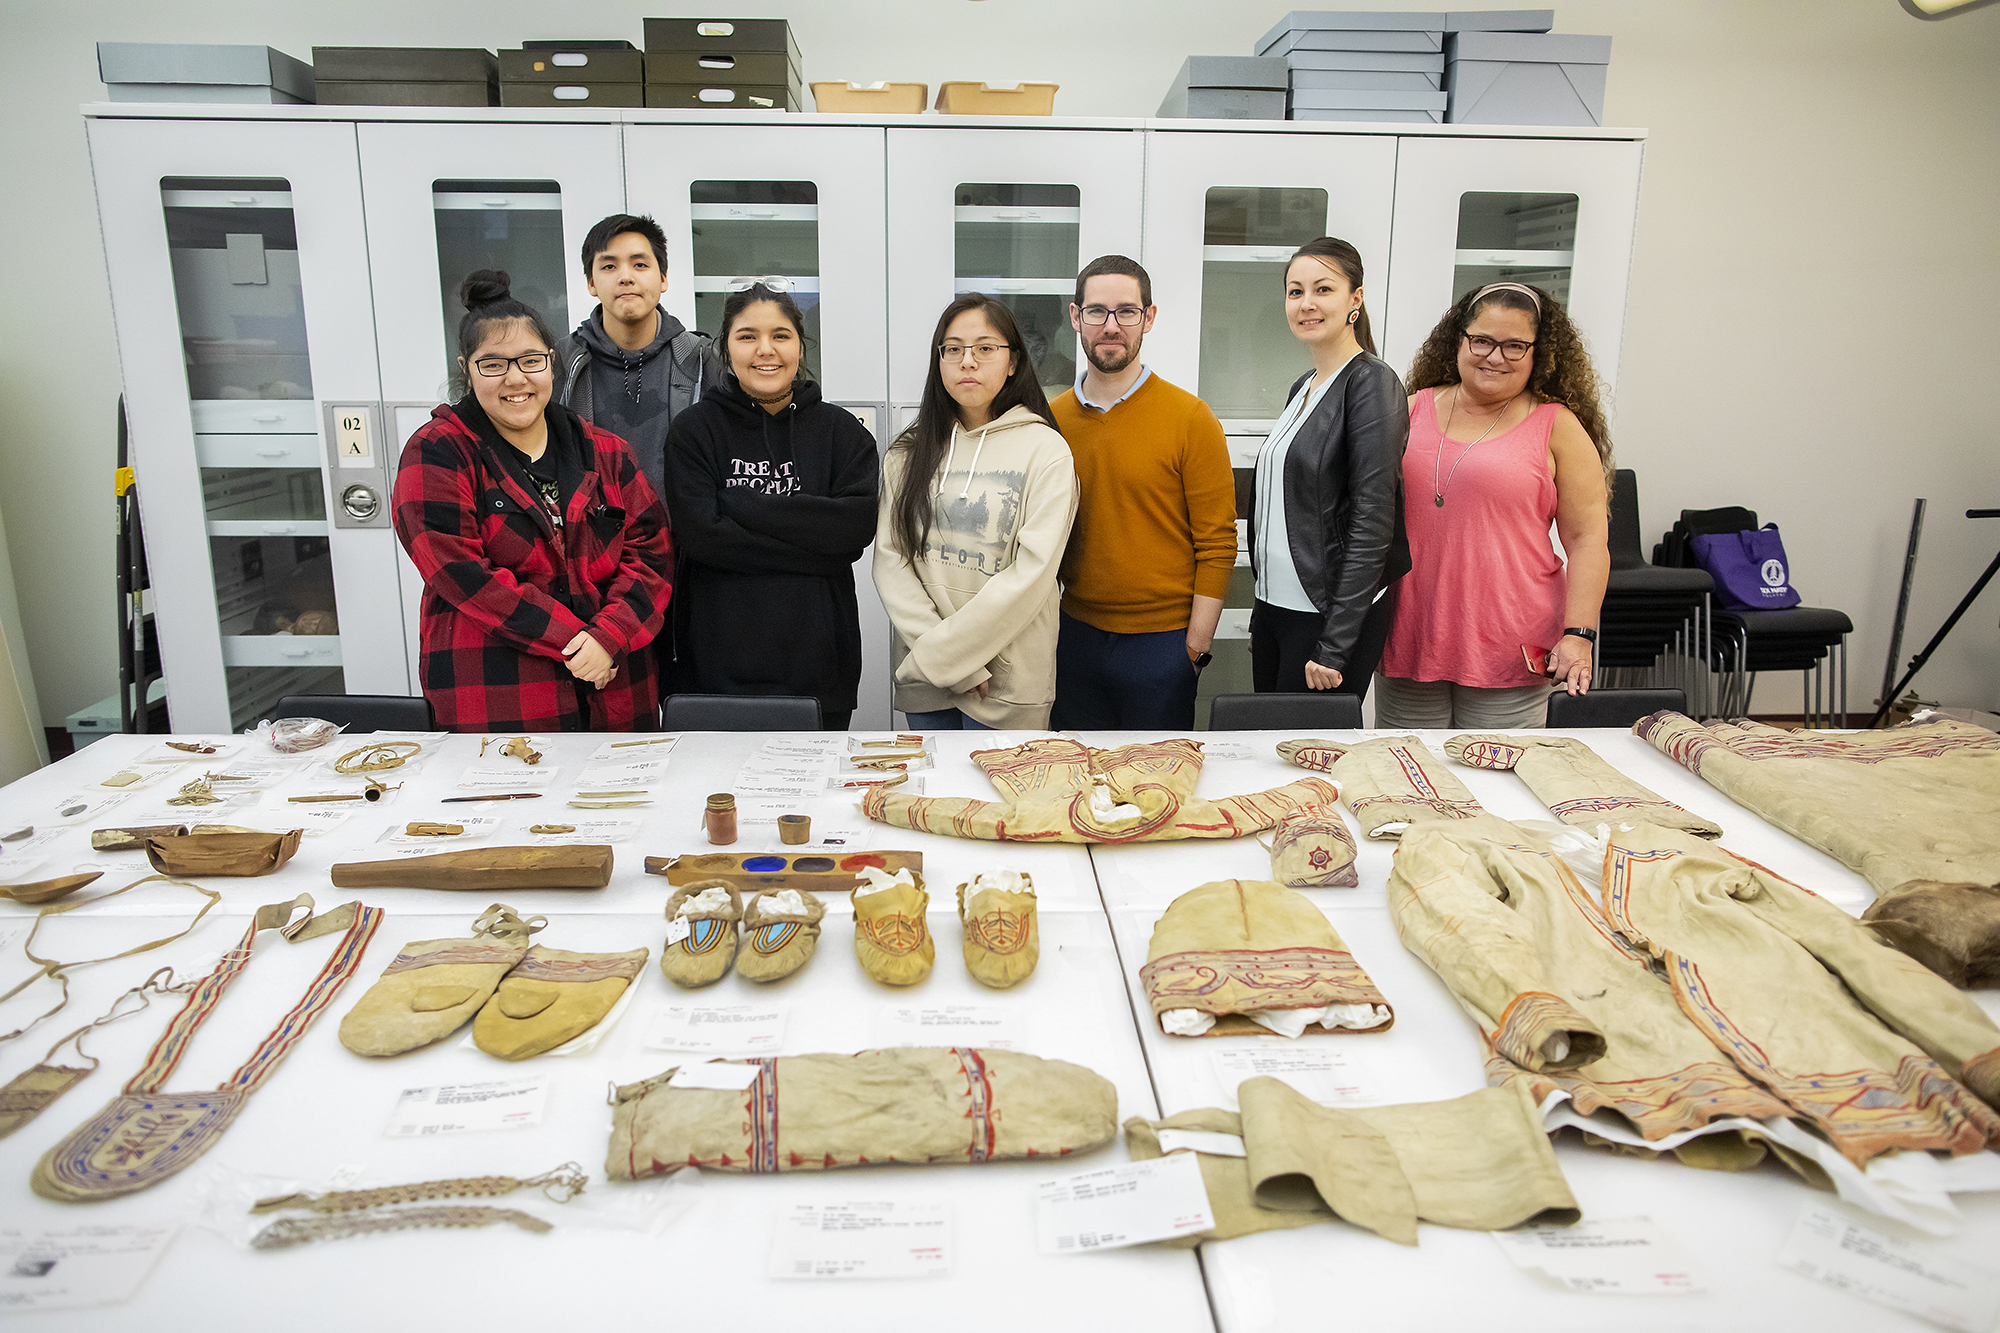 The seven visitors from the Naskapi Nation group standing in front of table filled with Native American objects. 